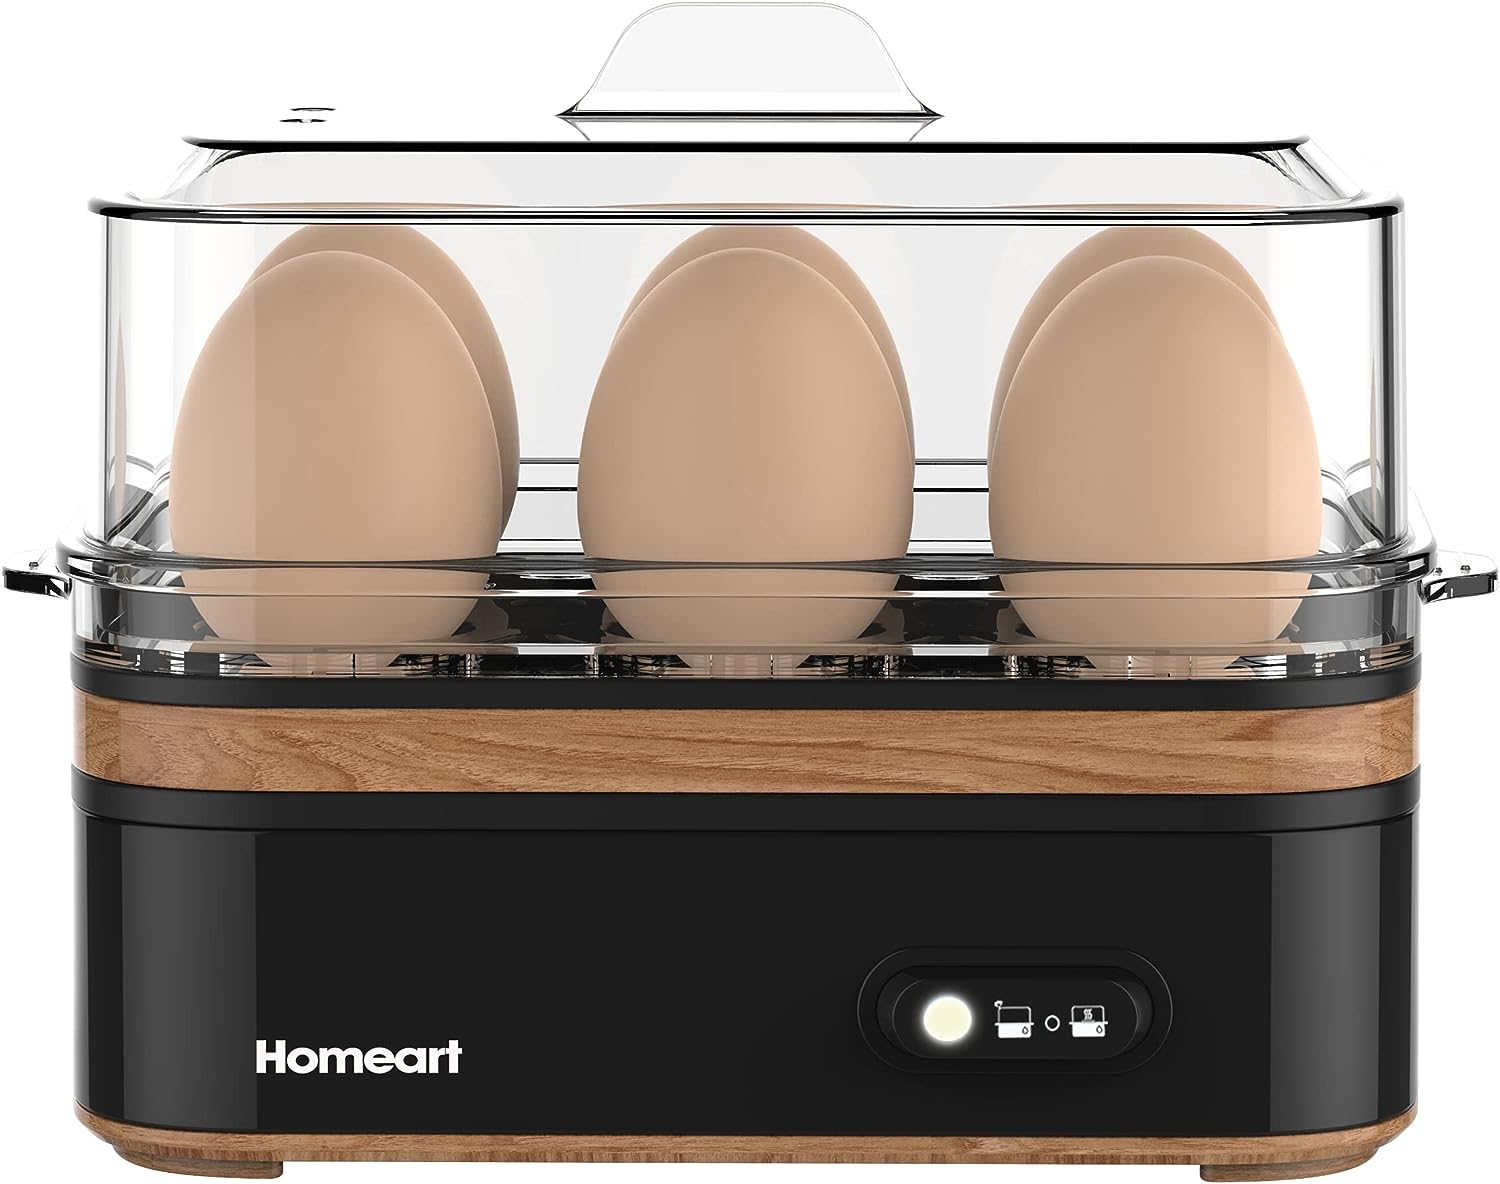 Homeart Panda Egg Boiler with Wooden Detail- Rapid Electric Hard Boiled Egg Cooker with Auto Shut-Off, Alarm and Egg Piercer, 6 Egg Capacity, Black, 400W